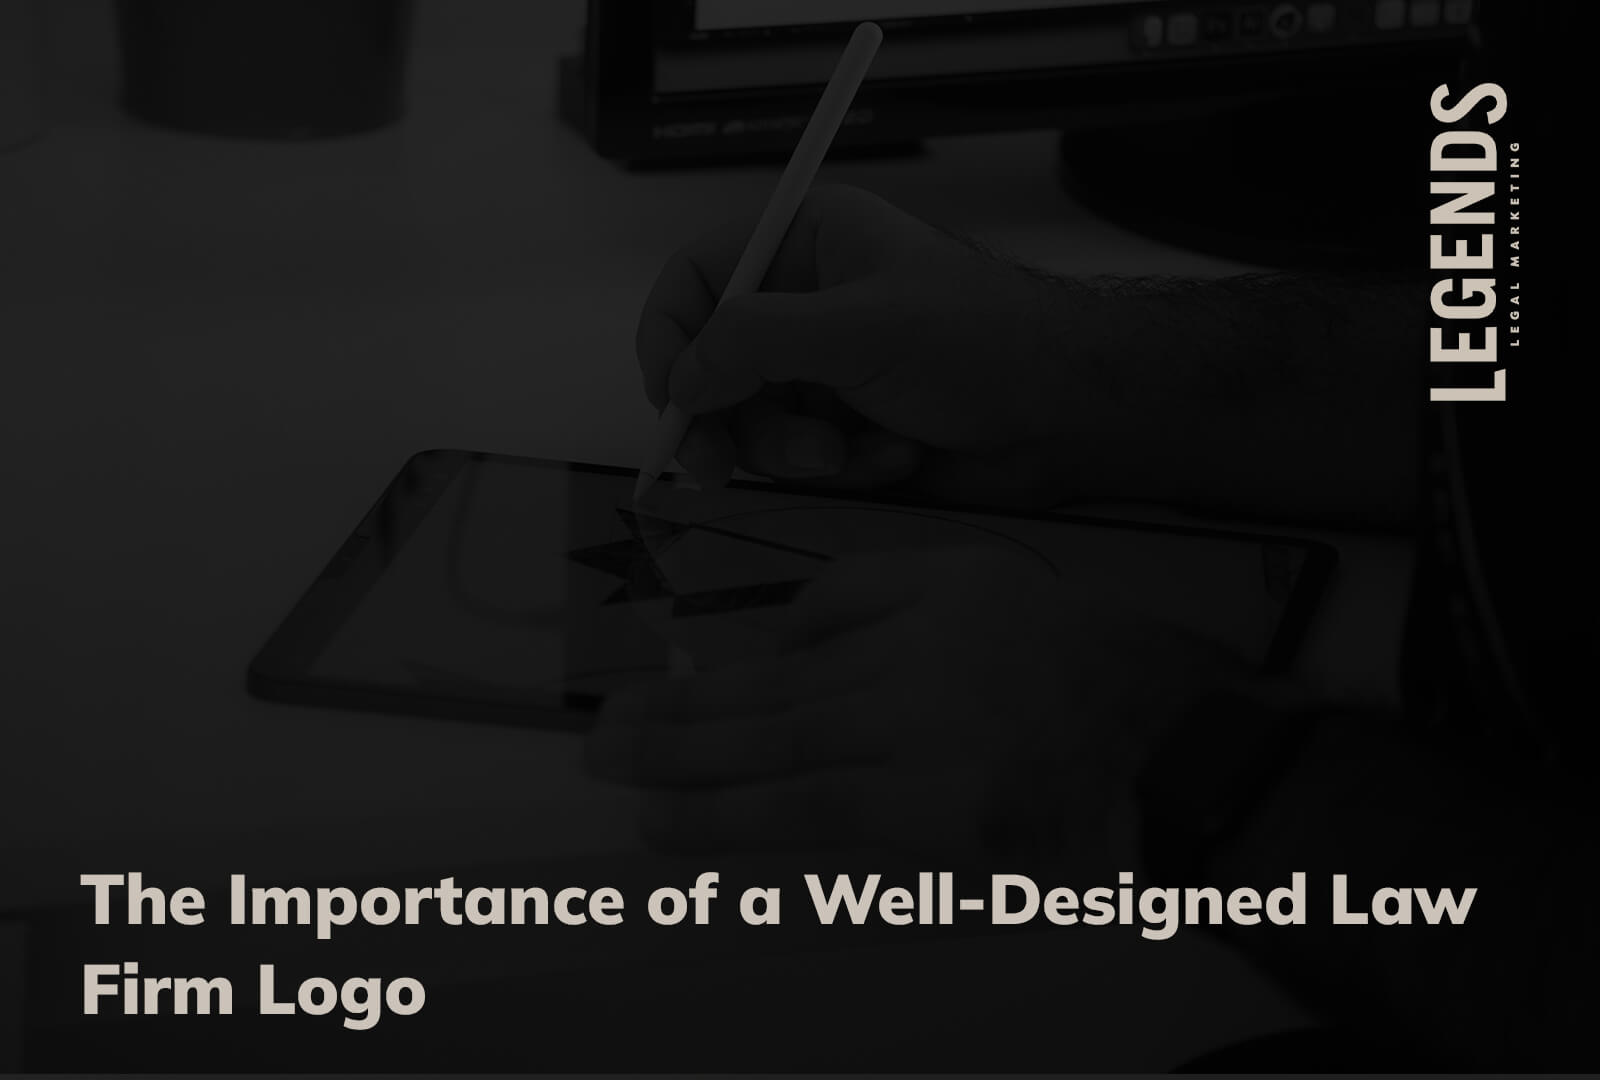 The Importance of a Well-Designed Law Firm Logo